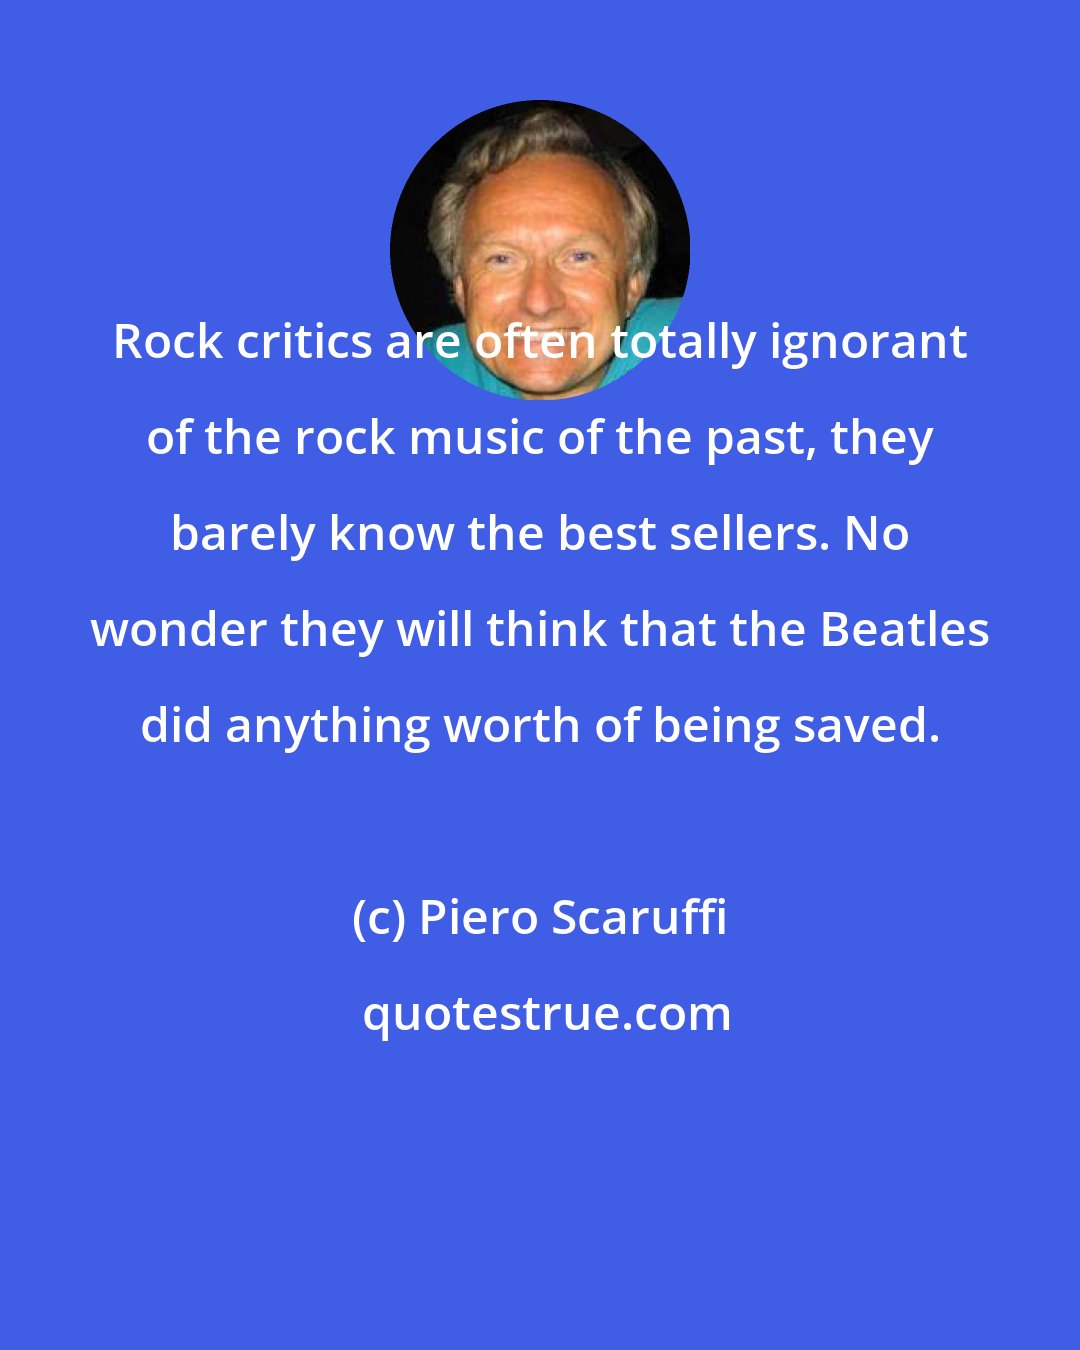 Piero Scaruffi: Rock critics are often totally ignorant of the rock music of the past, they barely know the best sellers. No wonder they will think that the Beatles did anything worth of being saved.